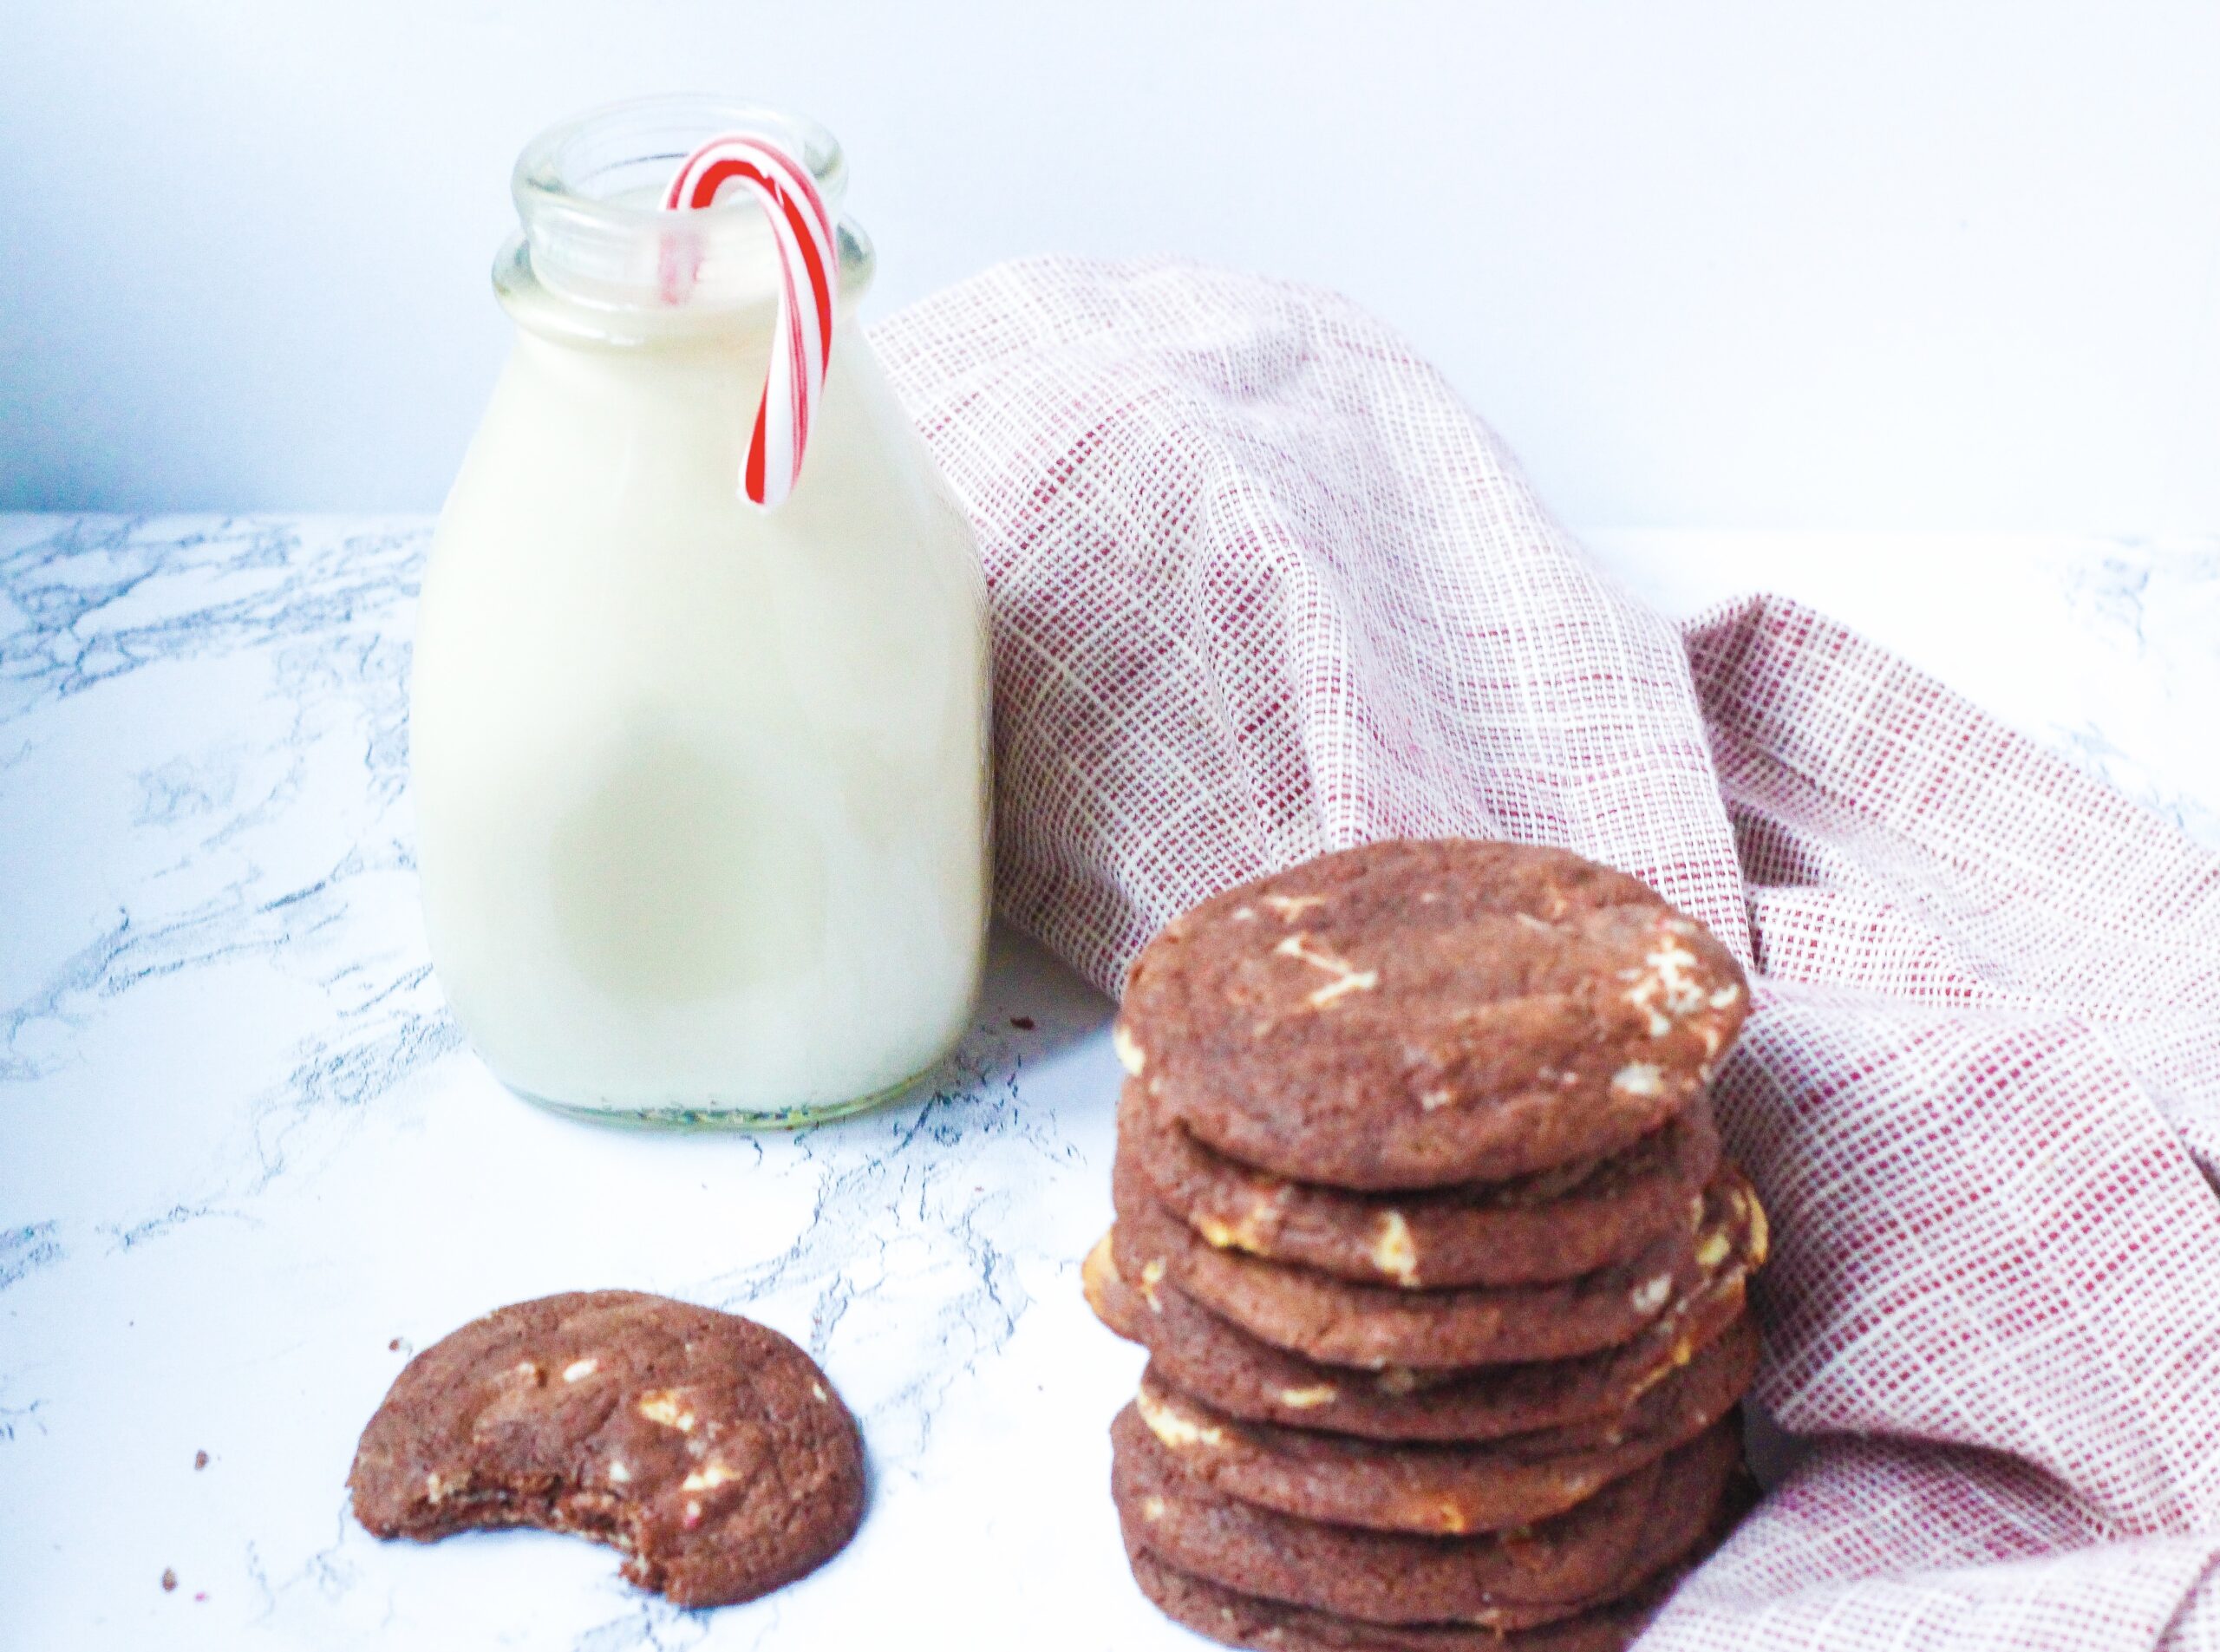 In the front right of the image is a stack of fudgy peppermint chocolate cookies. To the right of the cookie stack is a red and white napkin that runs toward the back left of the frame where there is a glass jar of milk with a candy cane in it. In front of the milk jar and to the left of the cookie stack is a fudgy peppermint chocolate cookie with a bite taken out of it.